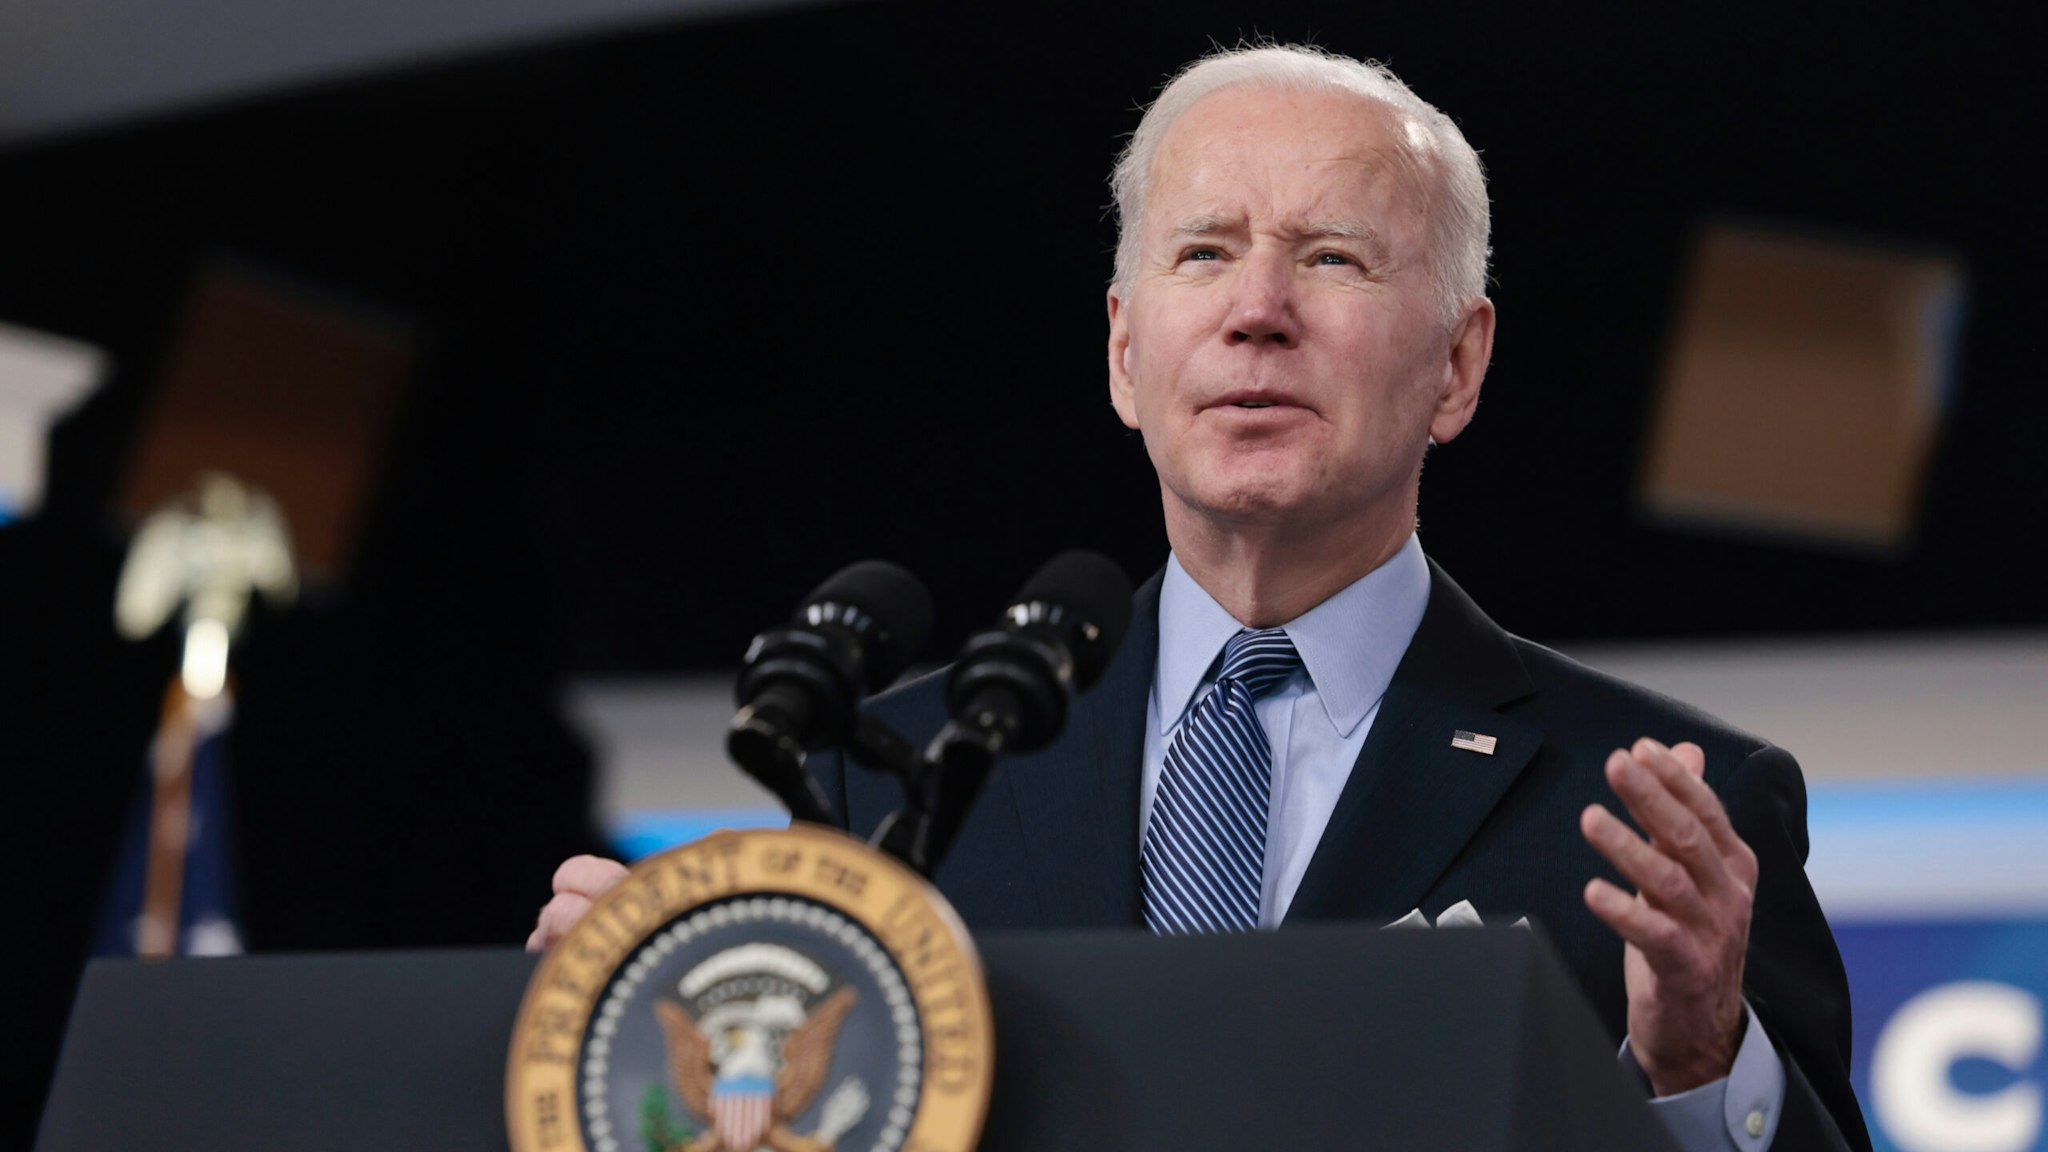 President Joe Biden gestures as he delivers remarks on Covid-19 in the United States in the South Court Auditorium on March 30, 2022 in Washington, DC.